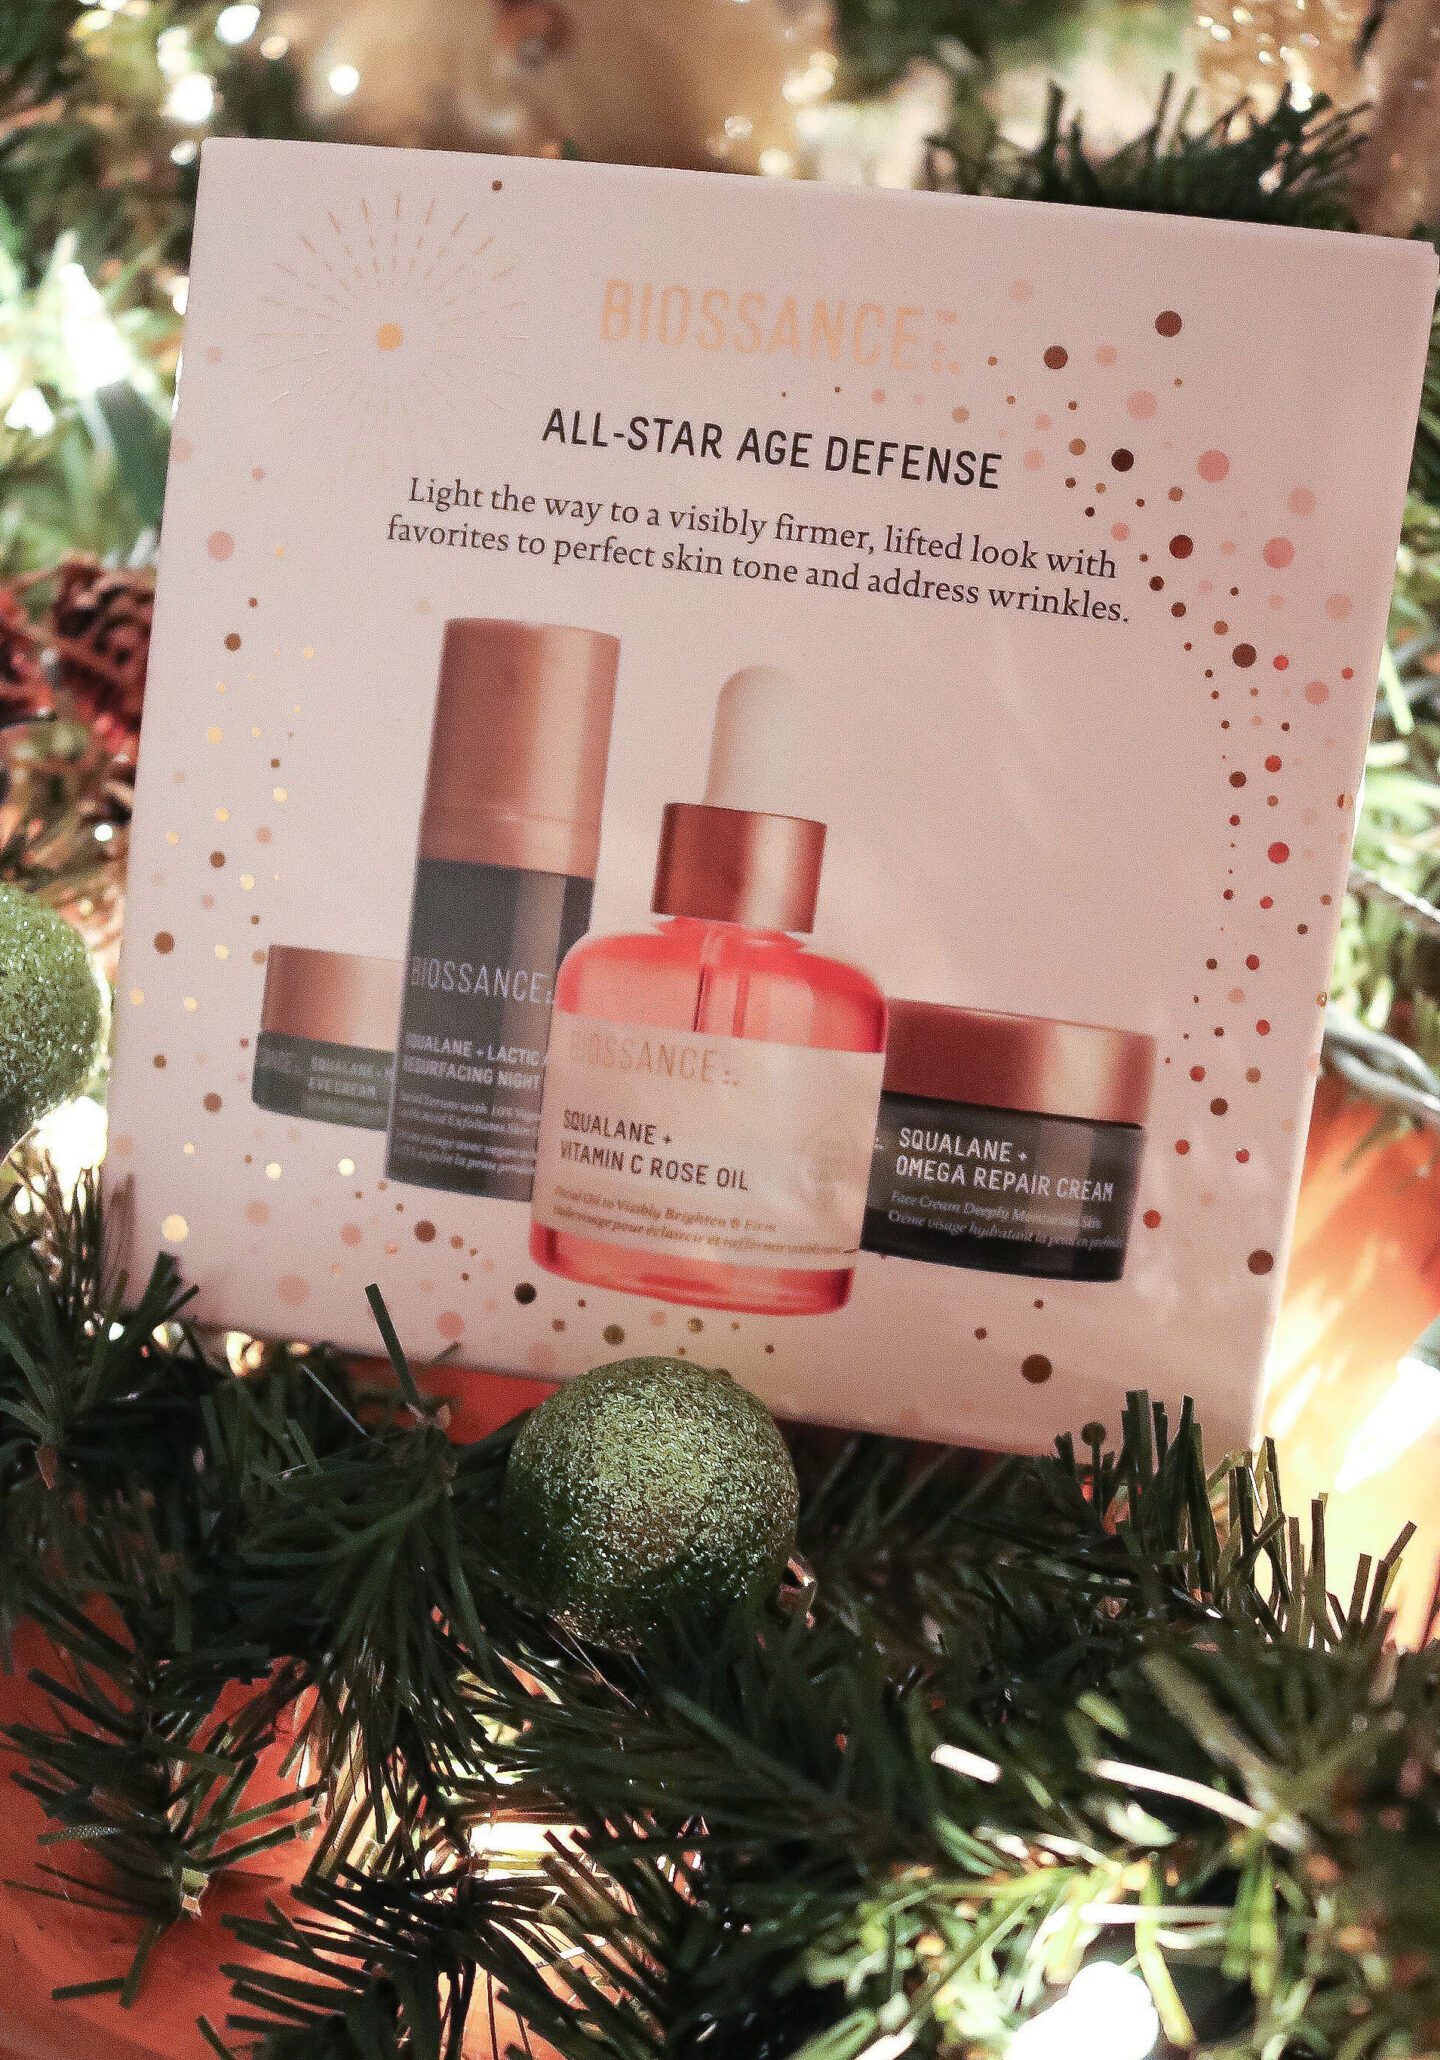 Best Skincare Gift Sets for Holiday 2020 I DreaminLace.com #GiftsforHer #GiftIdeas #Skincare